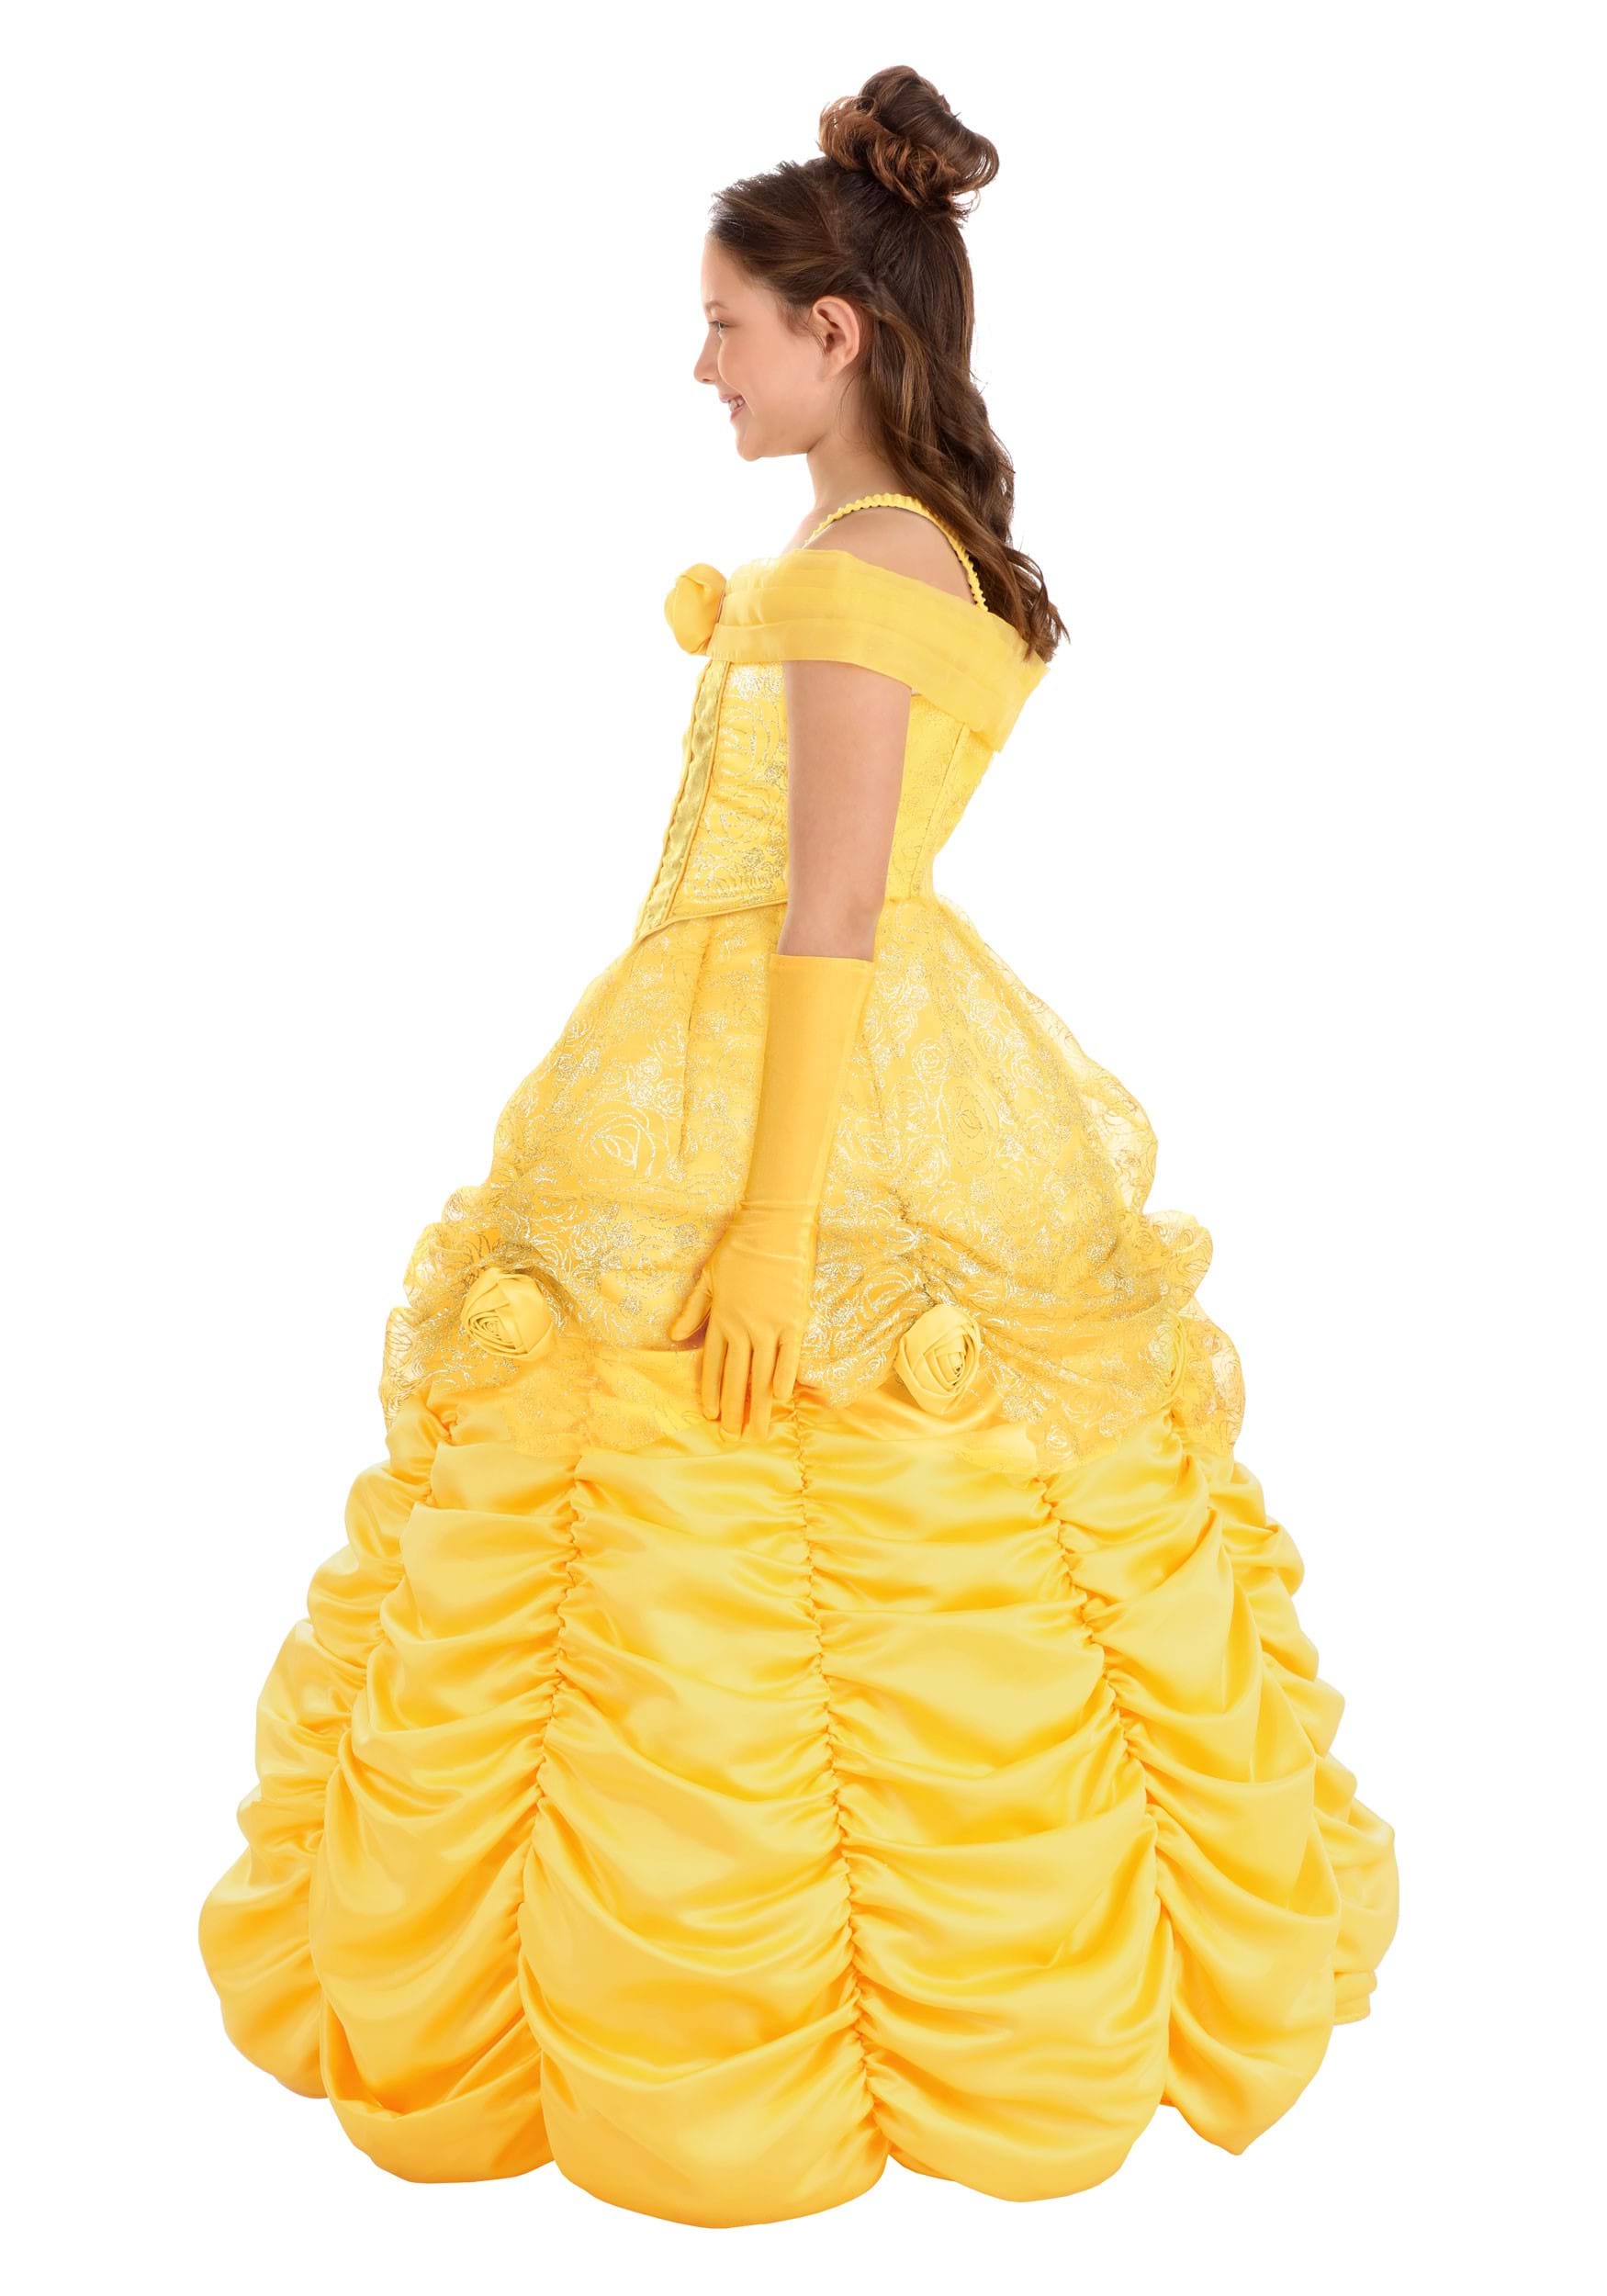 Belle Dress / Disney Princess Dress Beauty and the Beast Belle Costume /  Yellow Dress / Ball Gown for Toddler, Child, Girl Princess Costume 